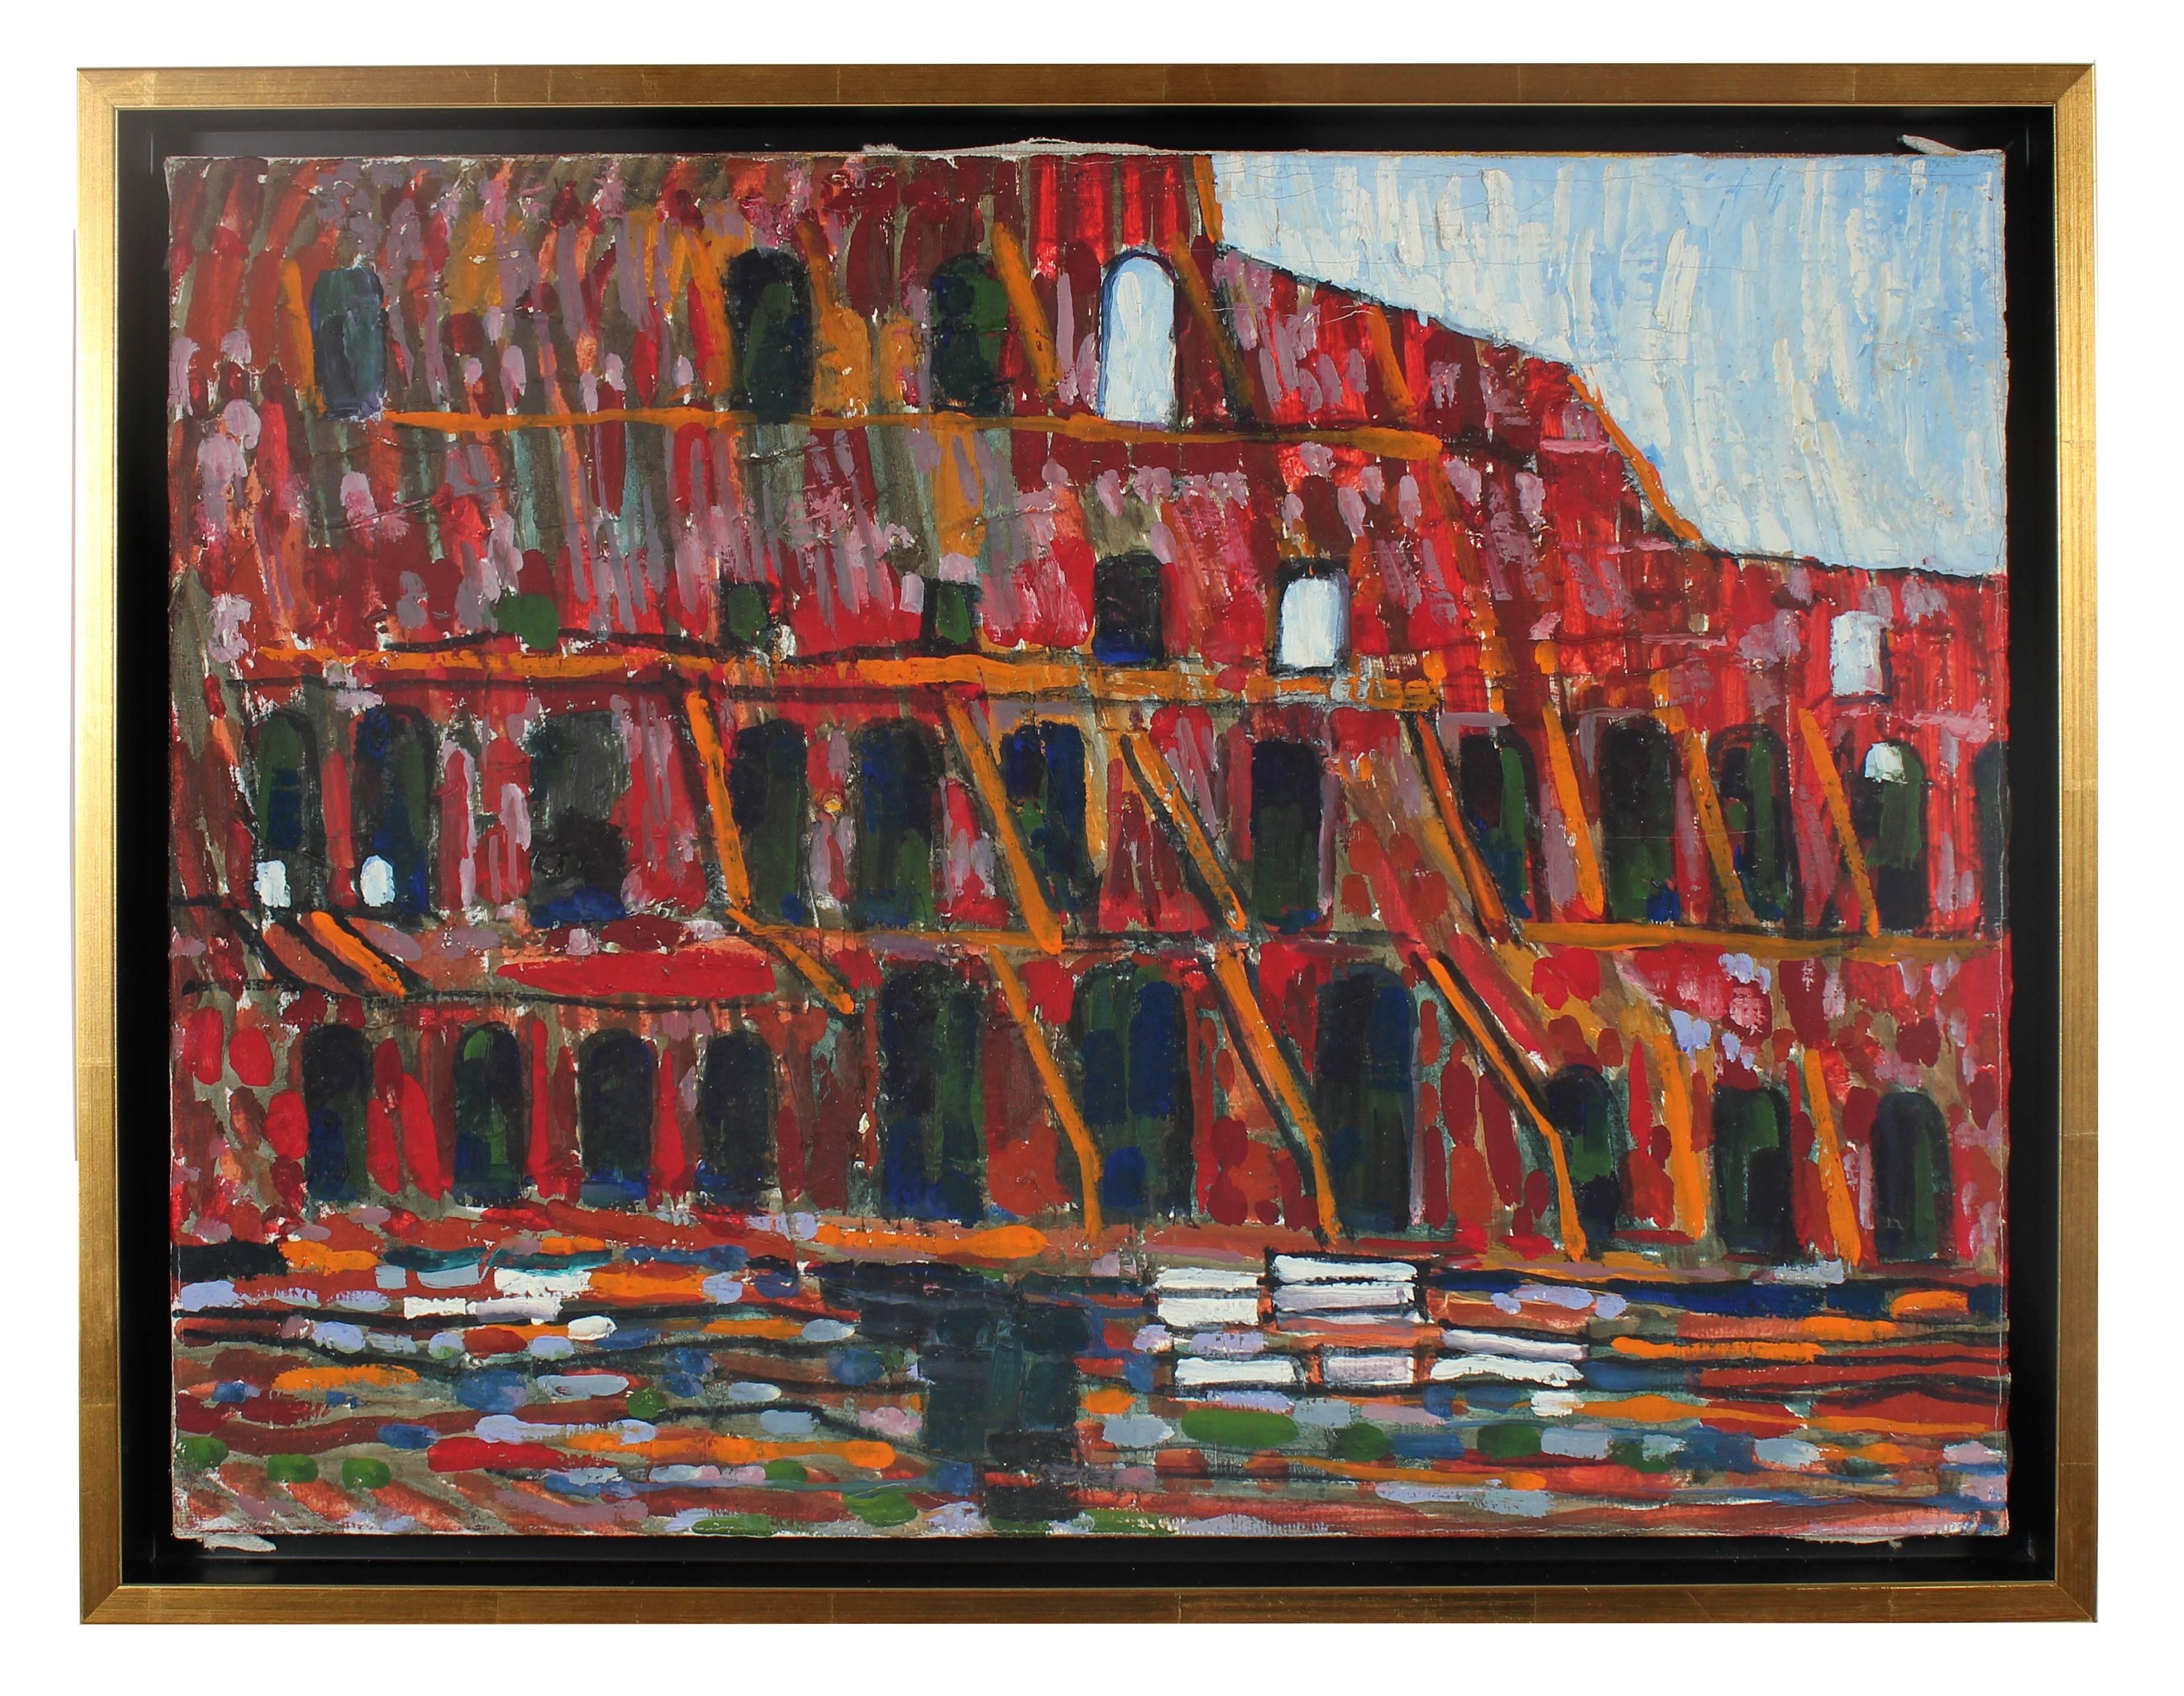 Rip Matteson Landscape Painting - "The Colosseum, Rome" Italian Oil on Canvas, 1971